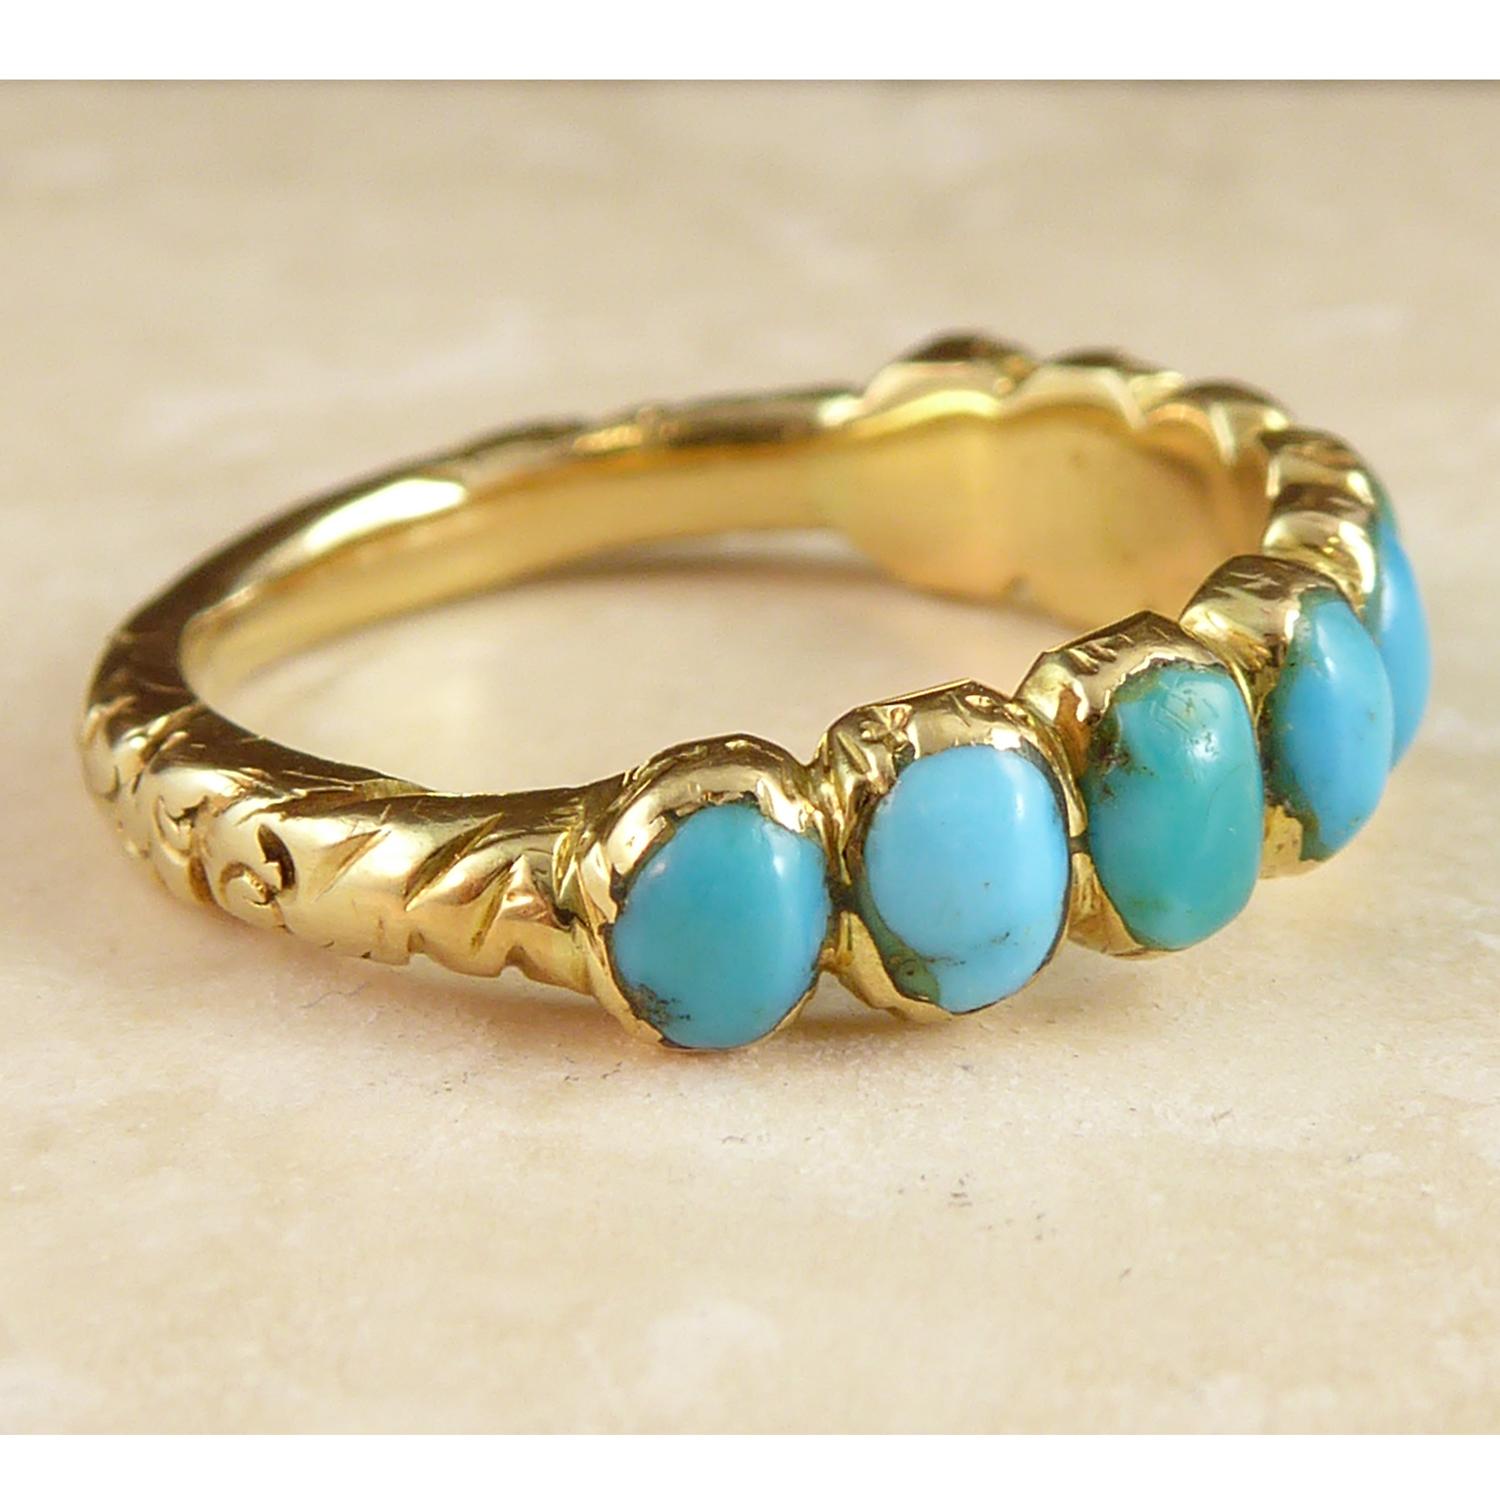 An antique Victorian wedding band set with a row of nine cabochon cut turquoise gemstone in rub-over gold mounts.  The style of the setting gives a scalloped edge to both sides of the turquoise set section.  The turquoise decline in size from the